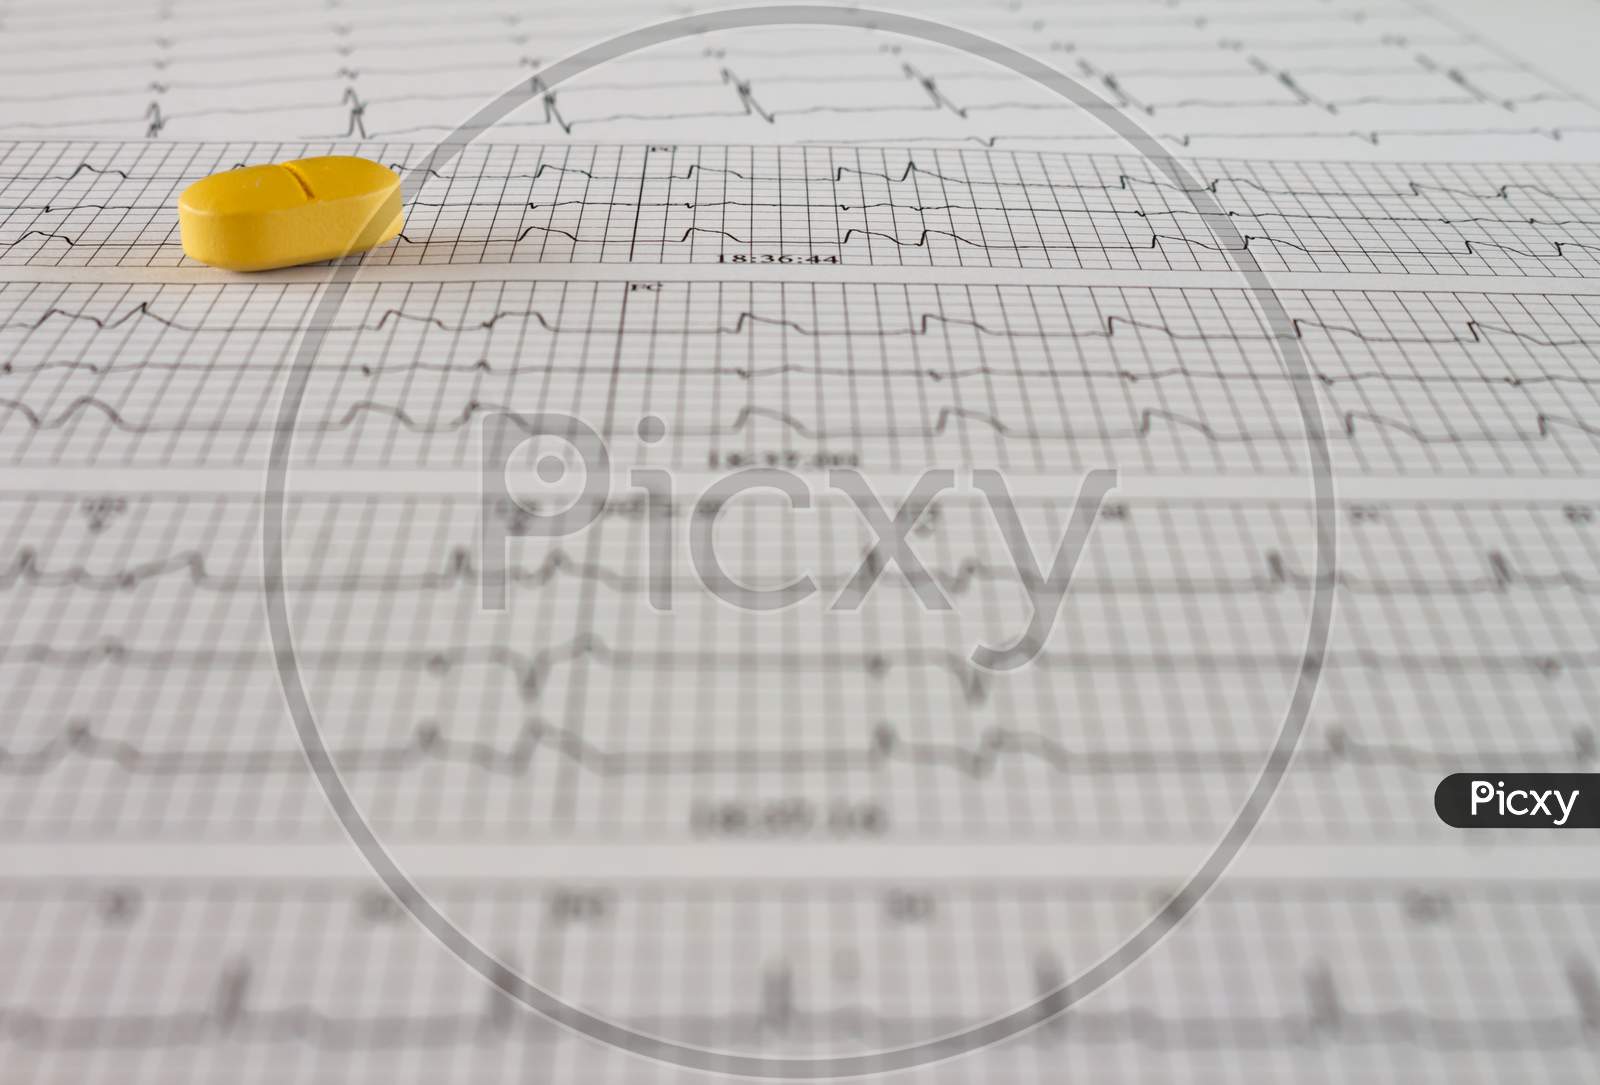 Colored Pills On An Electrocardiogram Paper. Medications For Cardiac Patients. Heartbeats Recorded On Paper. Selective Focus.